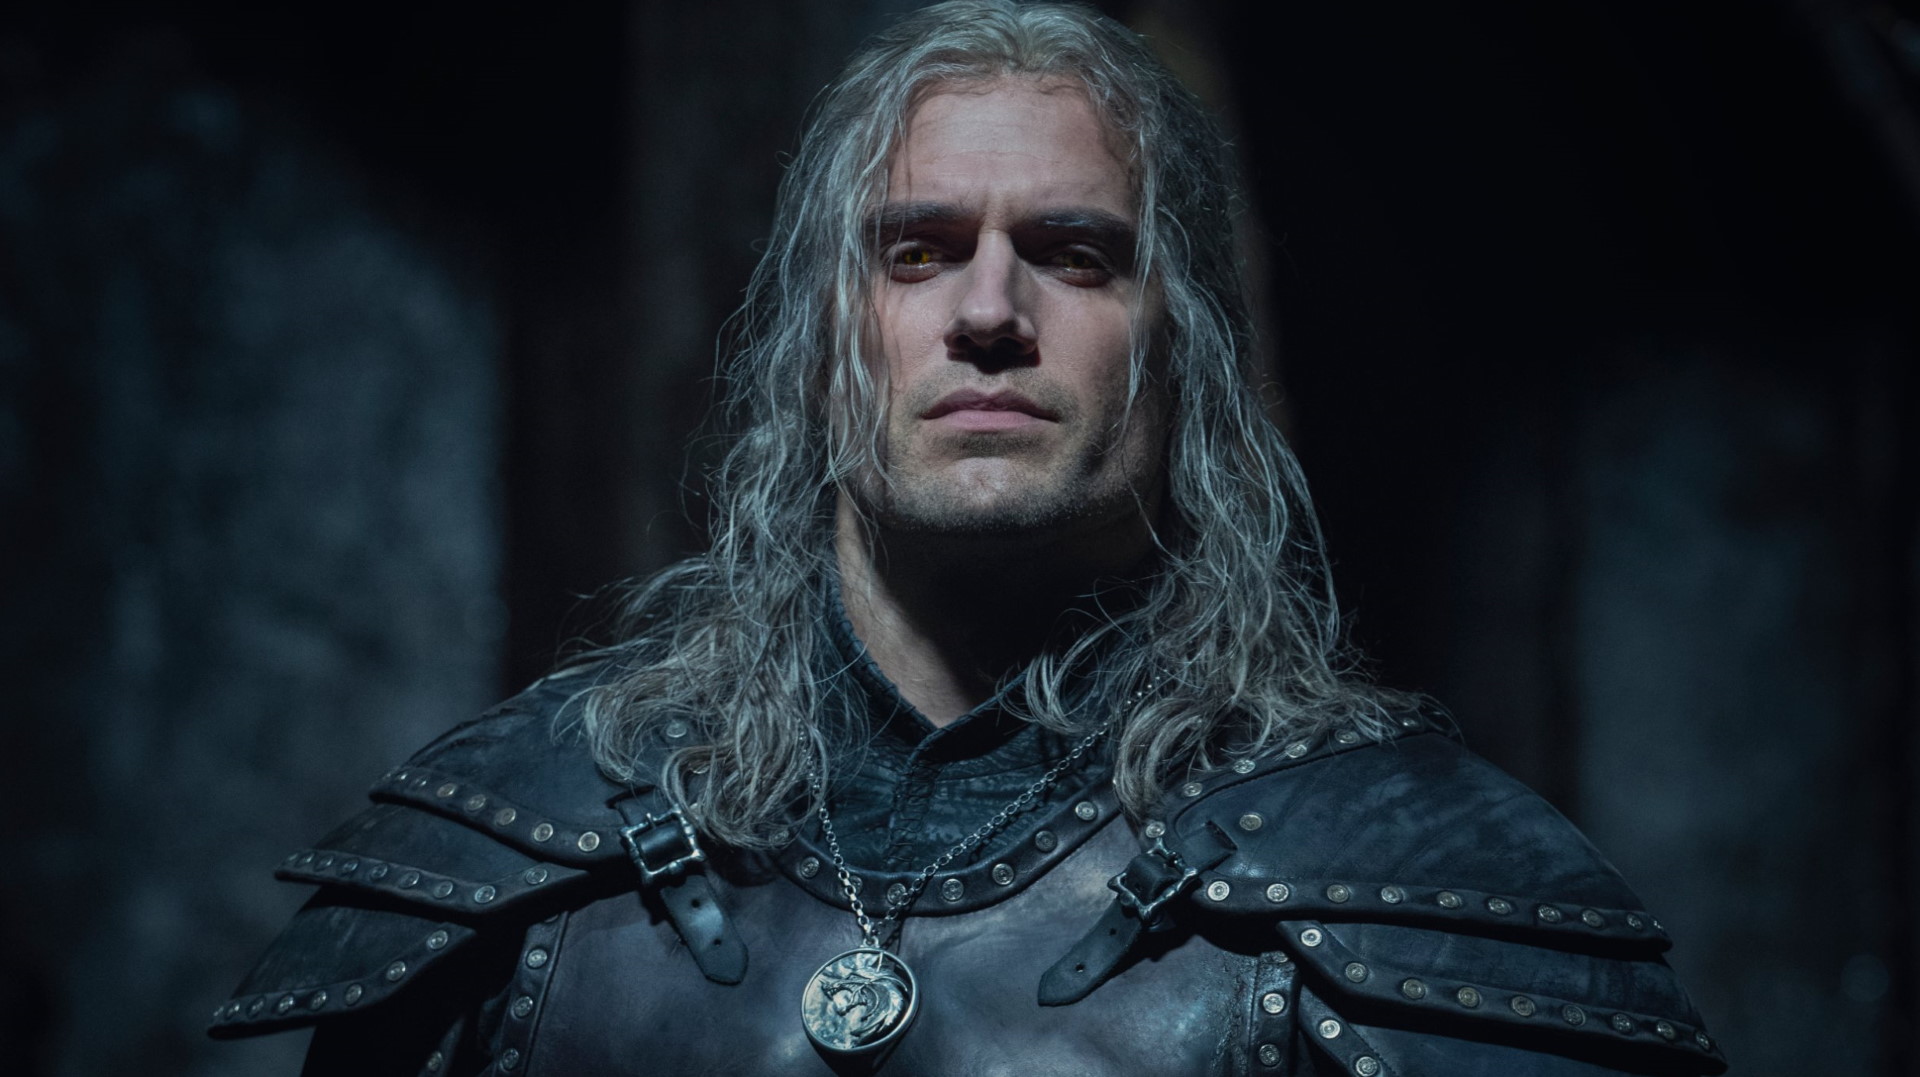 The Witcher season 2 Netflix release date, trailers, and episode